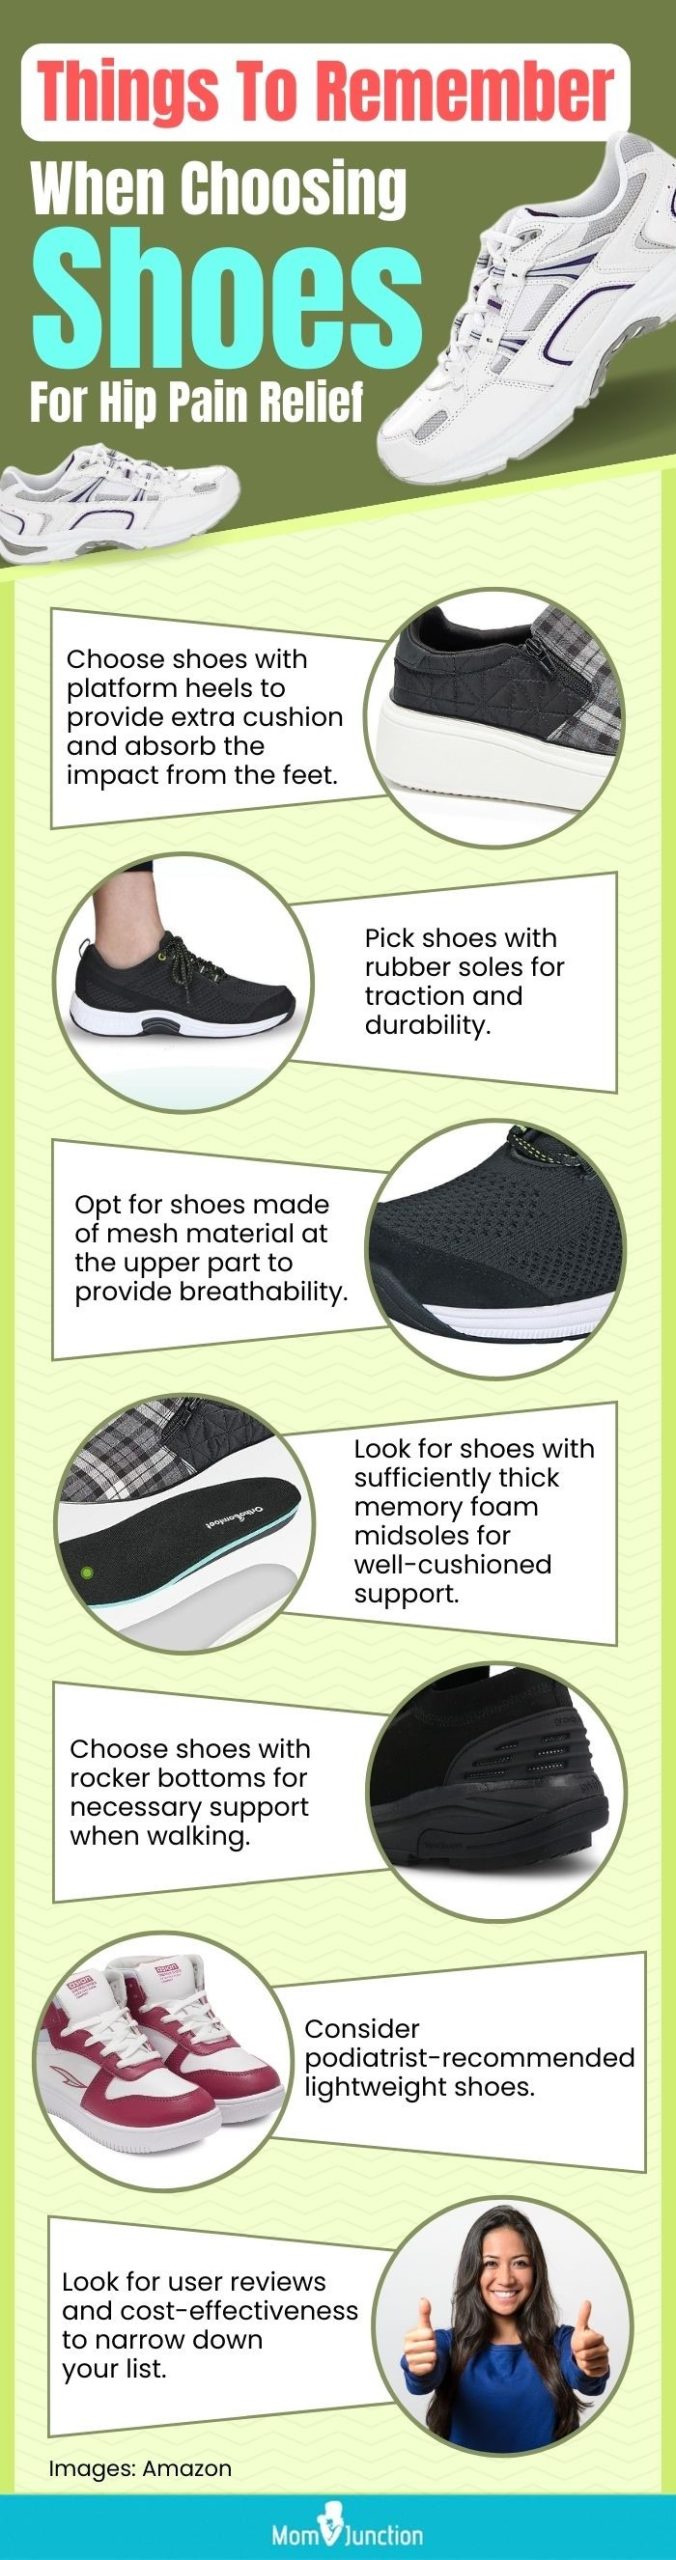 Things To Remember When Choosing Shoes For Hip Pain Relief (infographic)